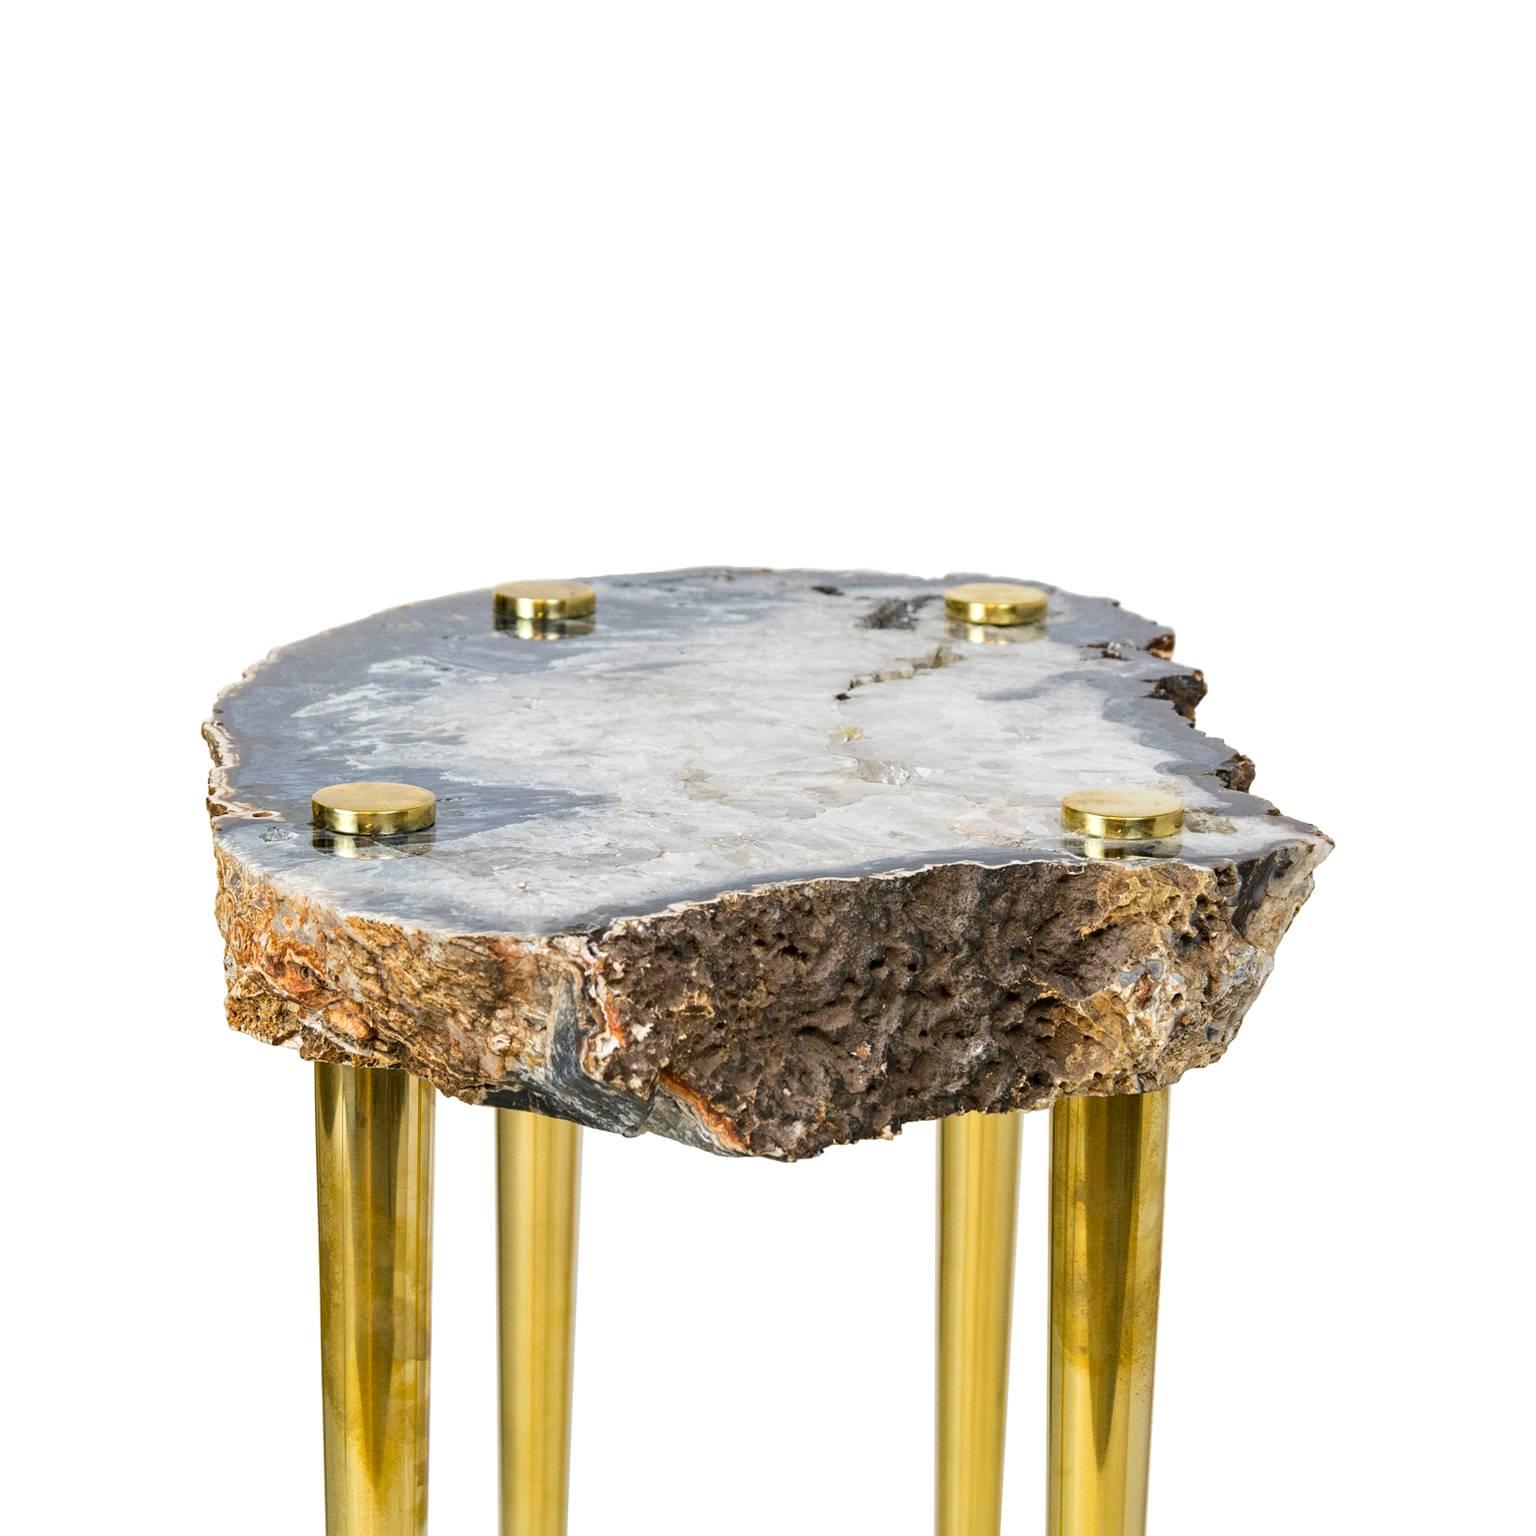 'Power of 10' Side Table in Quartz and Sold Brass by Christopher Kreiling

Zoom in and get lost in the beauty of this high-polished natural quartz crystal slab tabletop that been pieced with solid brass turned legs. The stone looks like an image